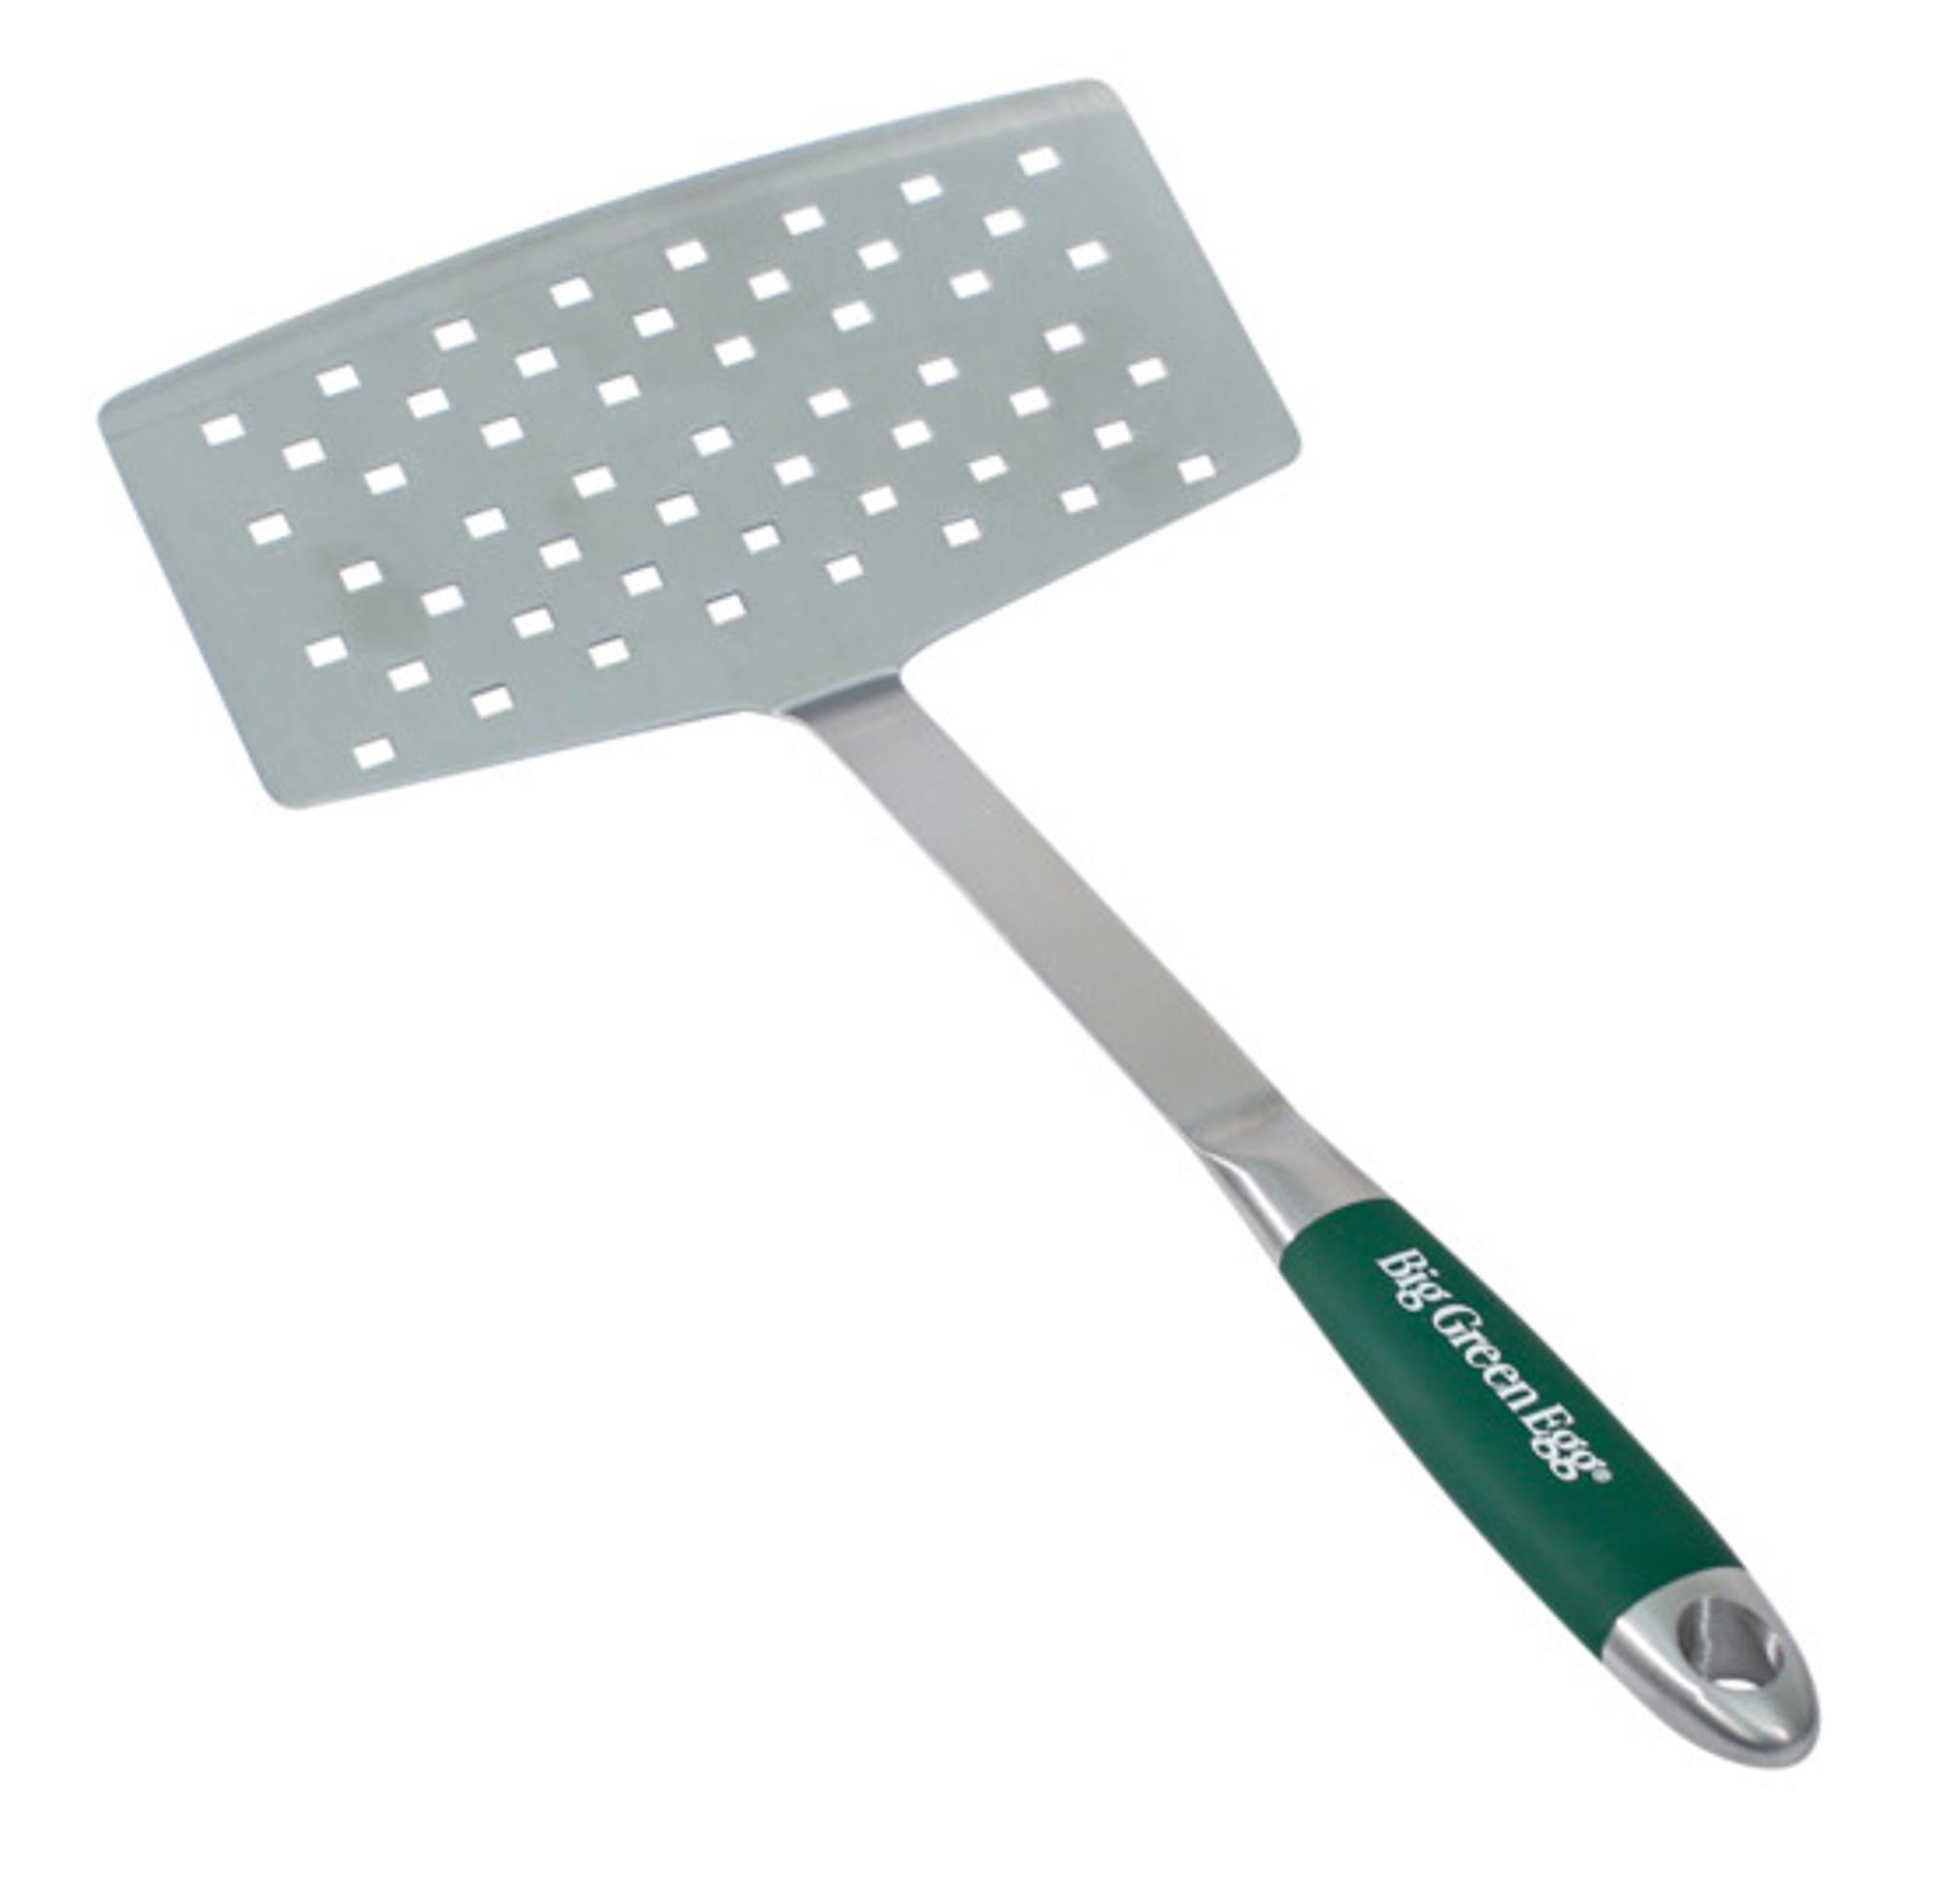 STAINLESS STEEL WIDE SPATULA | 127426 | 665719127426